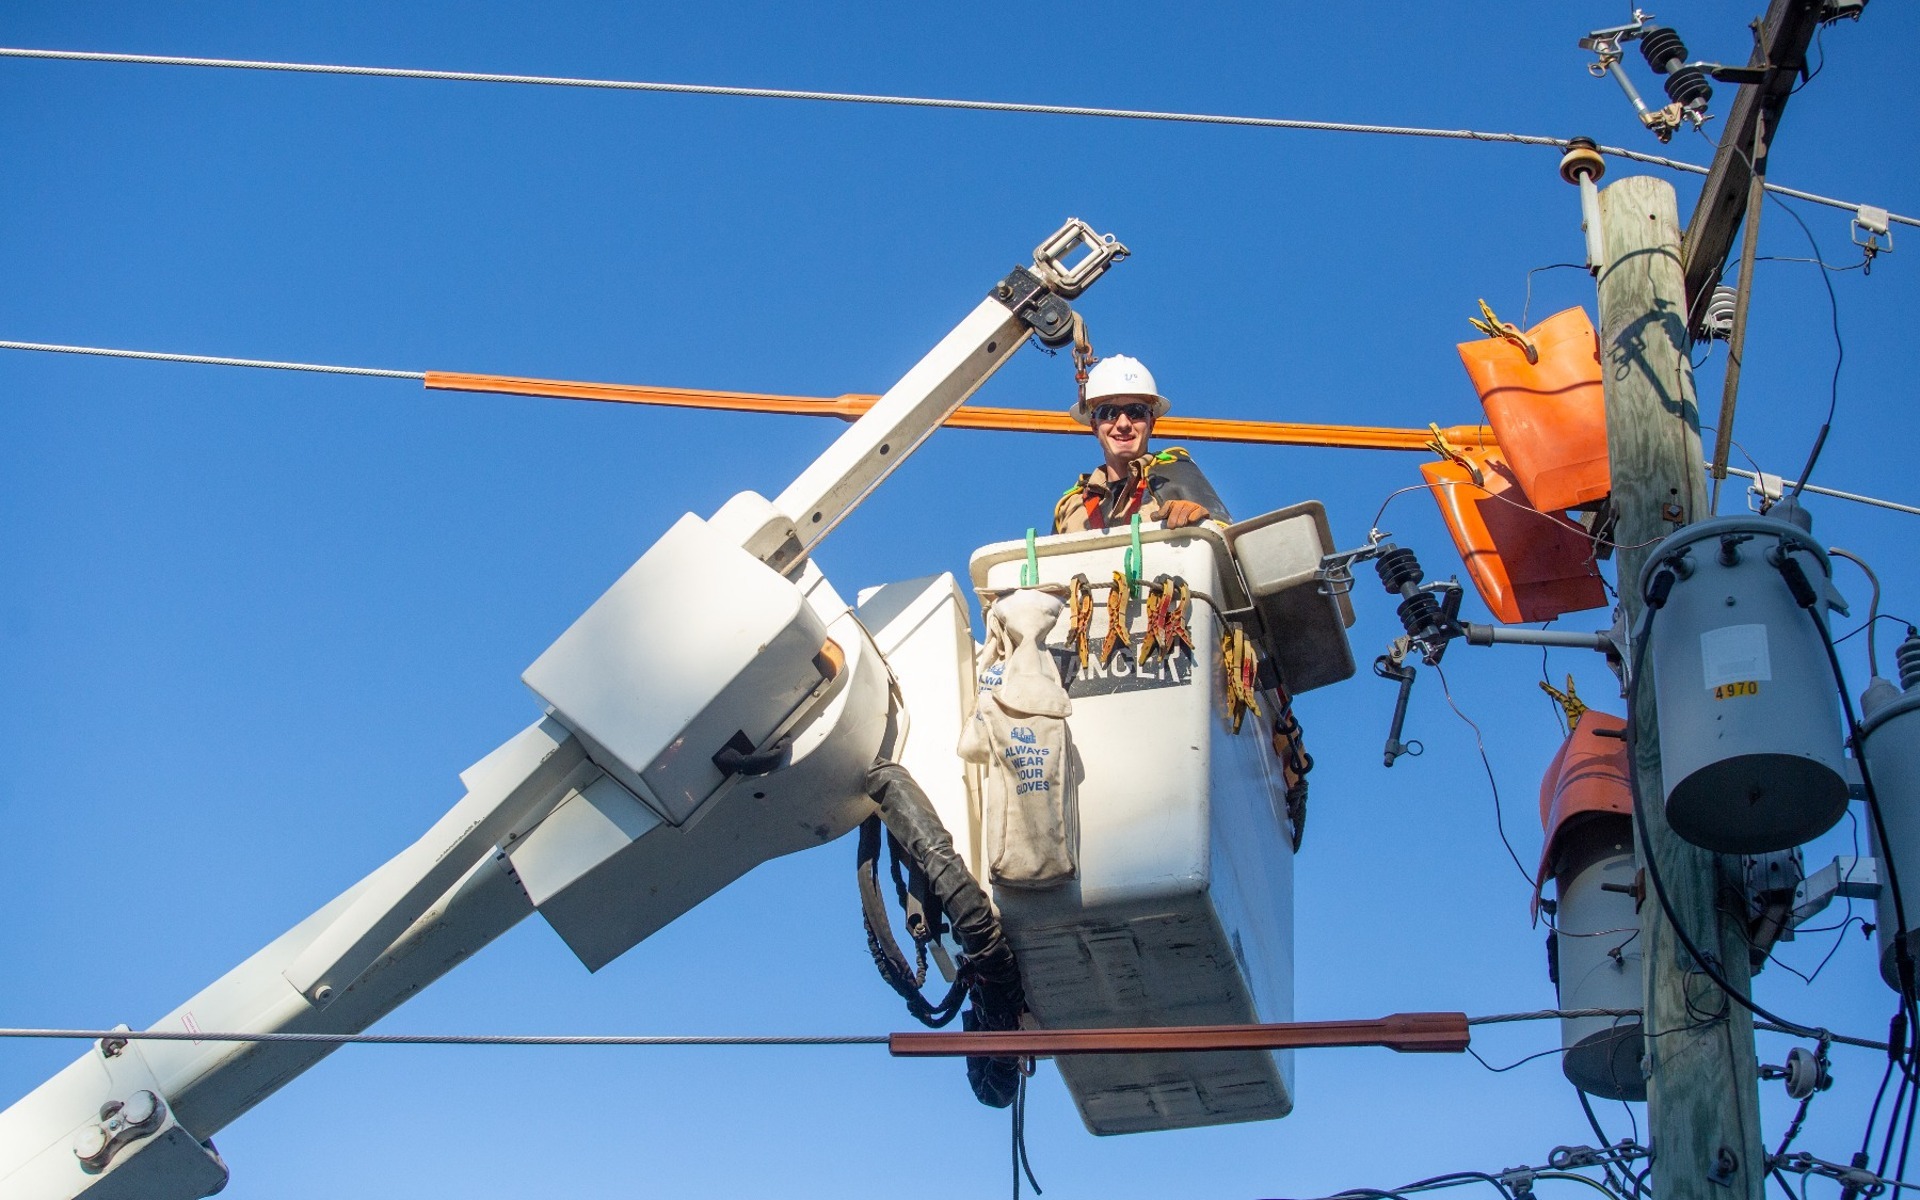 electric line worker smiles down from a basket working on a power line